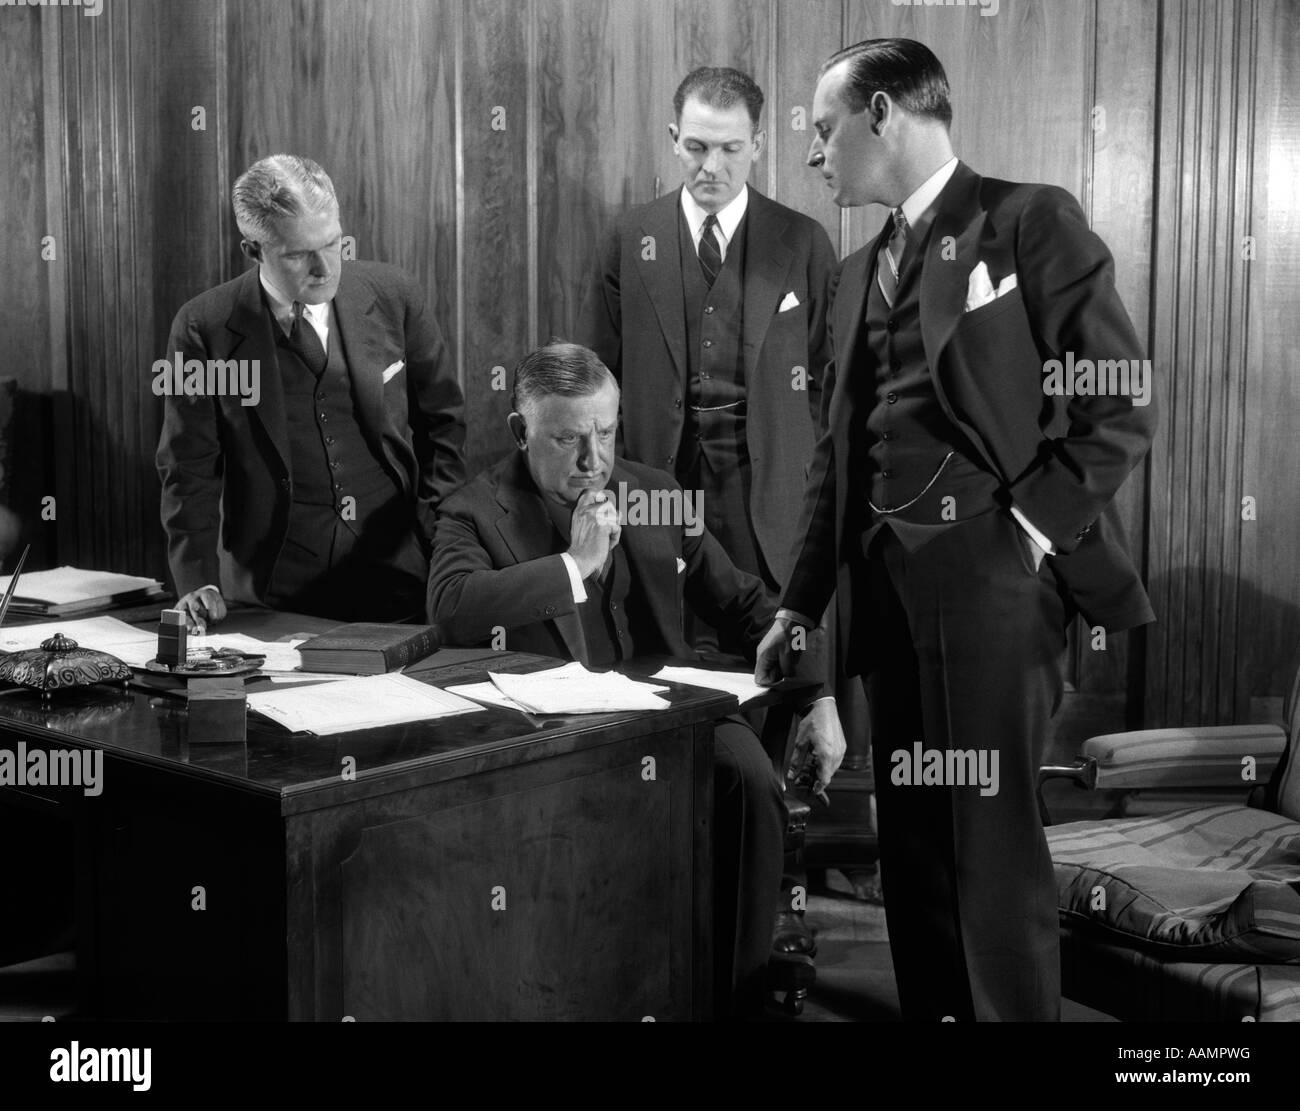 1930s FOUR BUSINESSMEN CONFERENCE OFFICE SERIOUS EXPRESSIONS Stock Photo